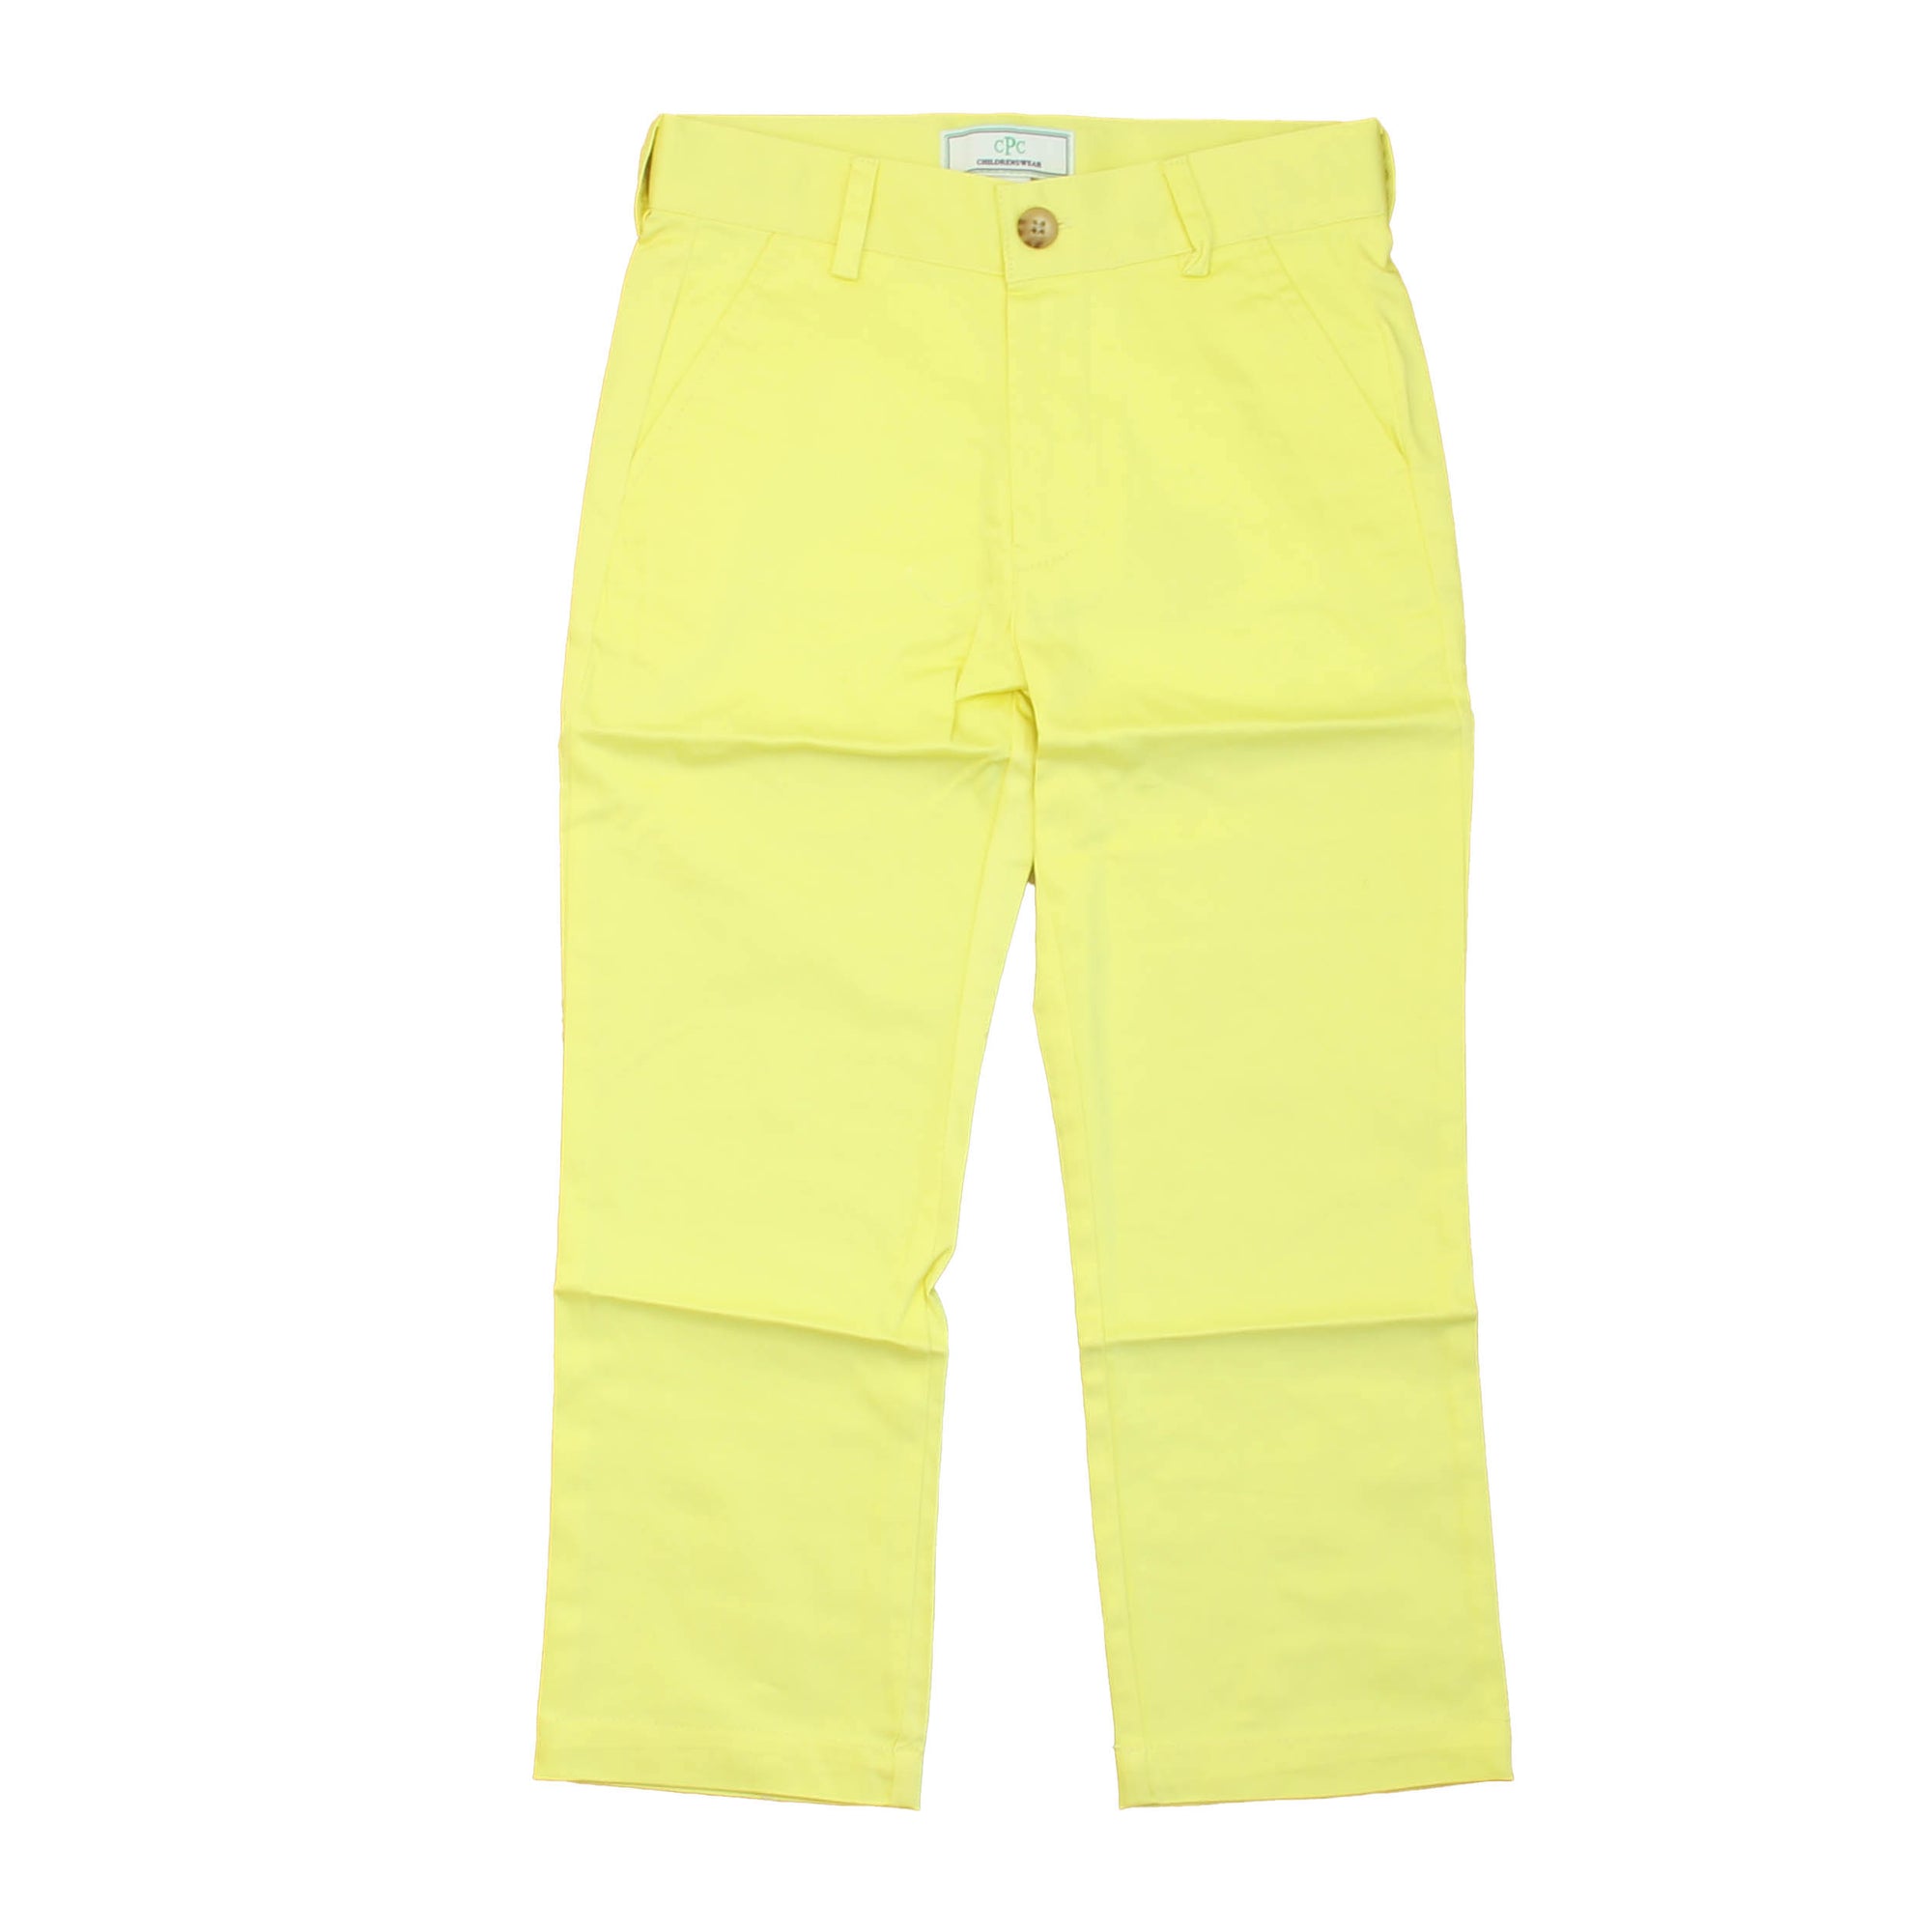 Limelight Yellow / 4T